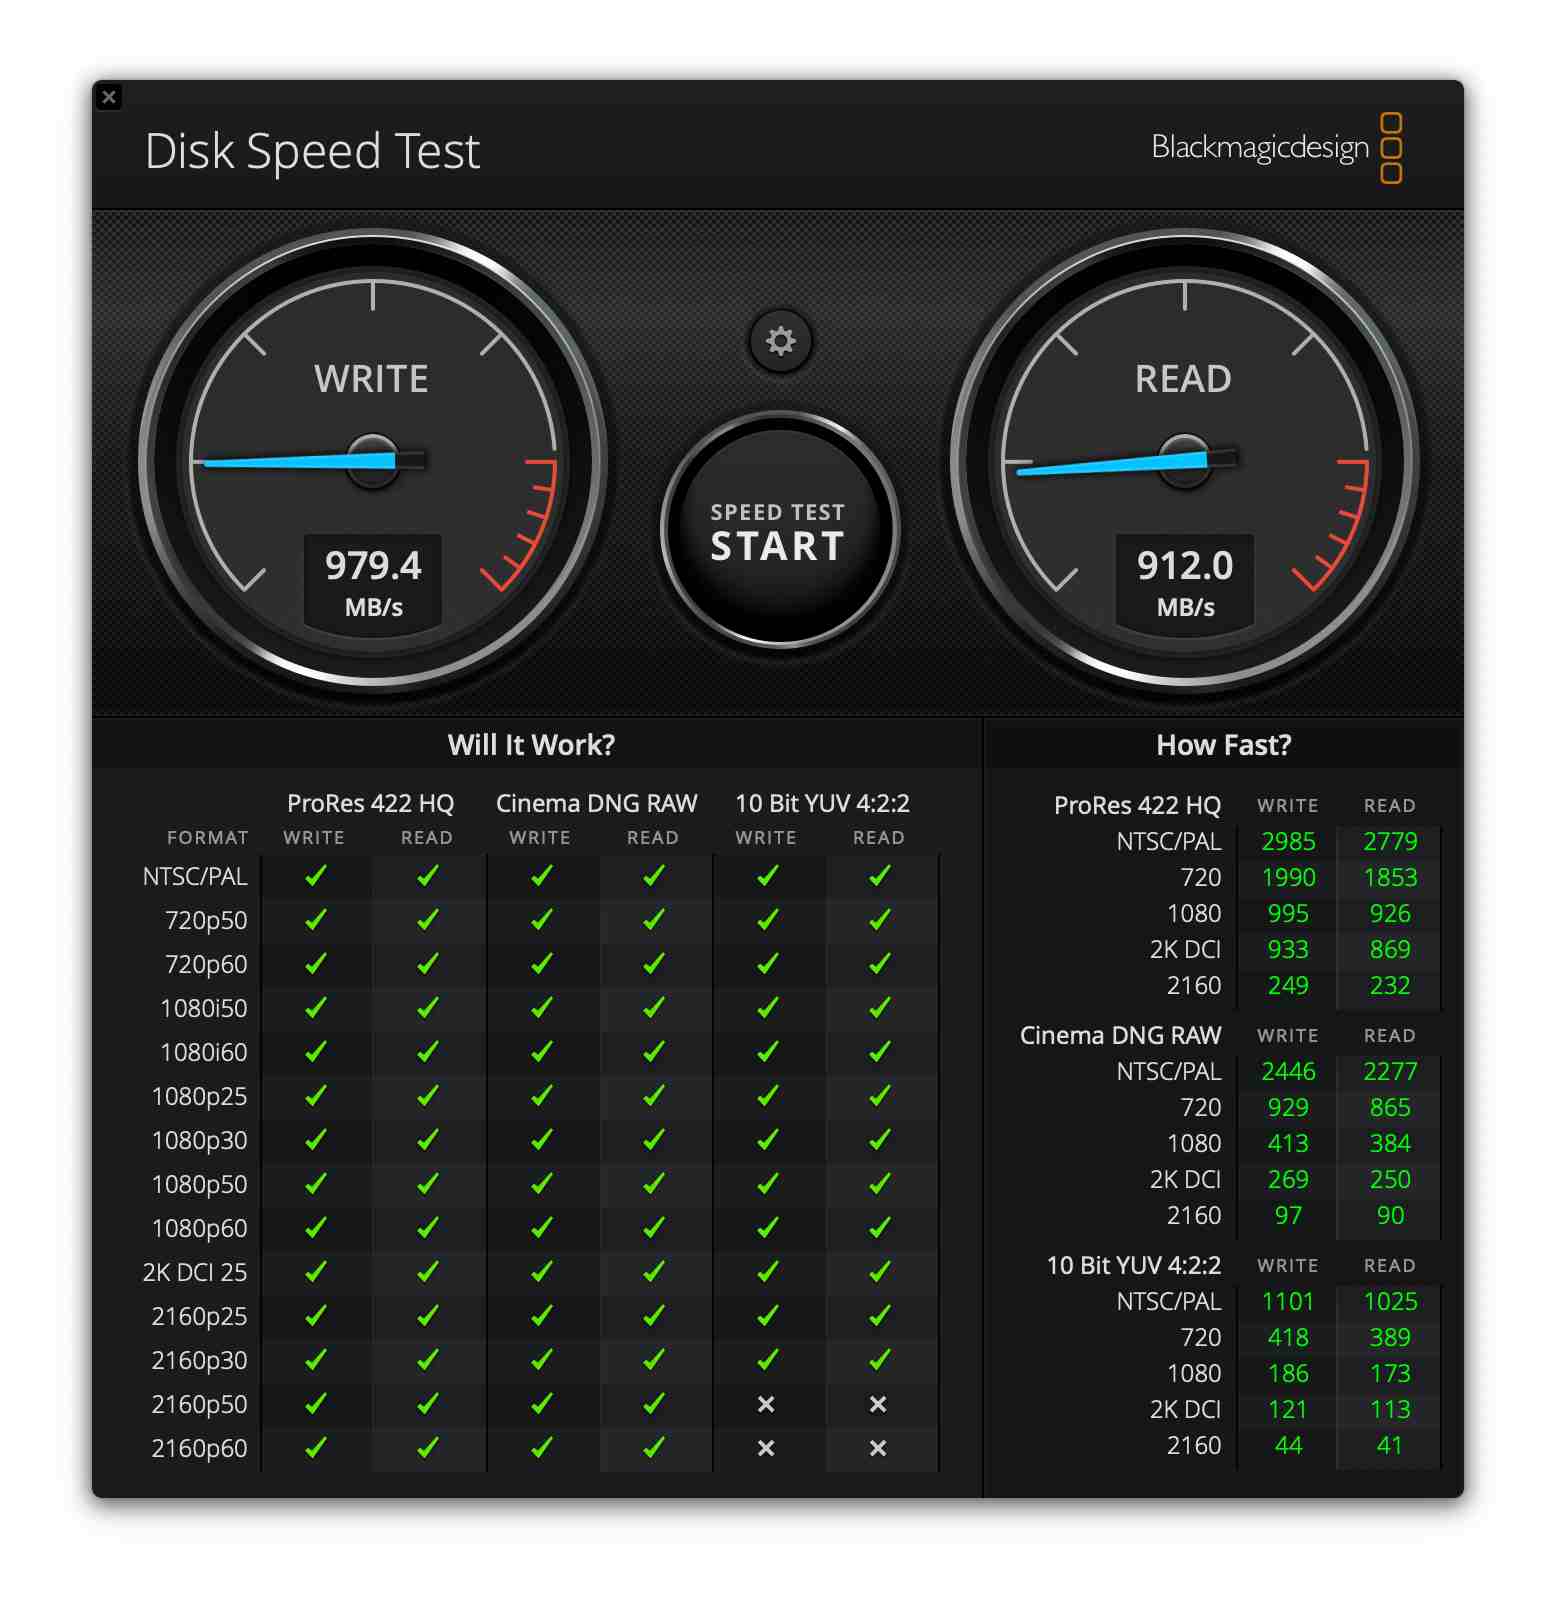 If you’re wondering why you’d need a 1 GBps read/write speed, here’s why. Not everyone needs that speed, but those that do, can’t function without it.